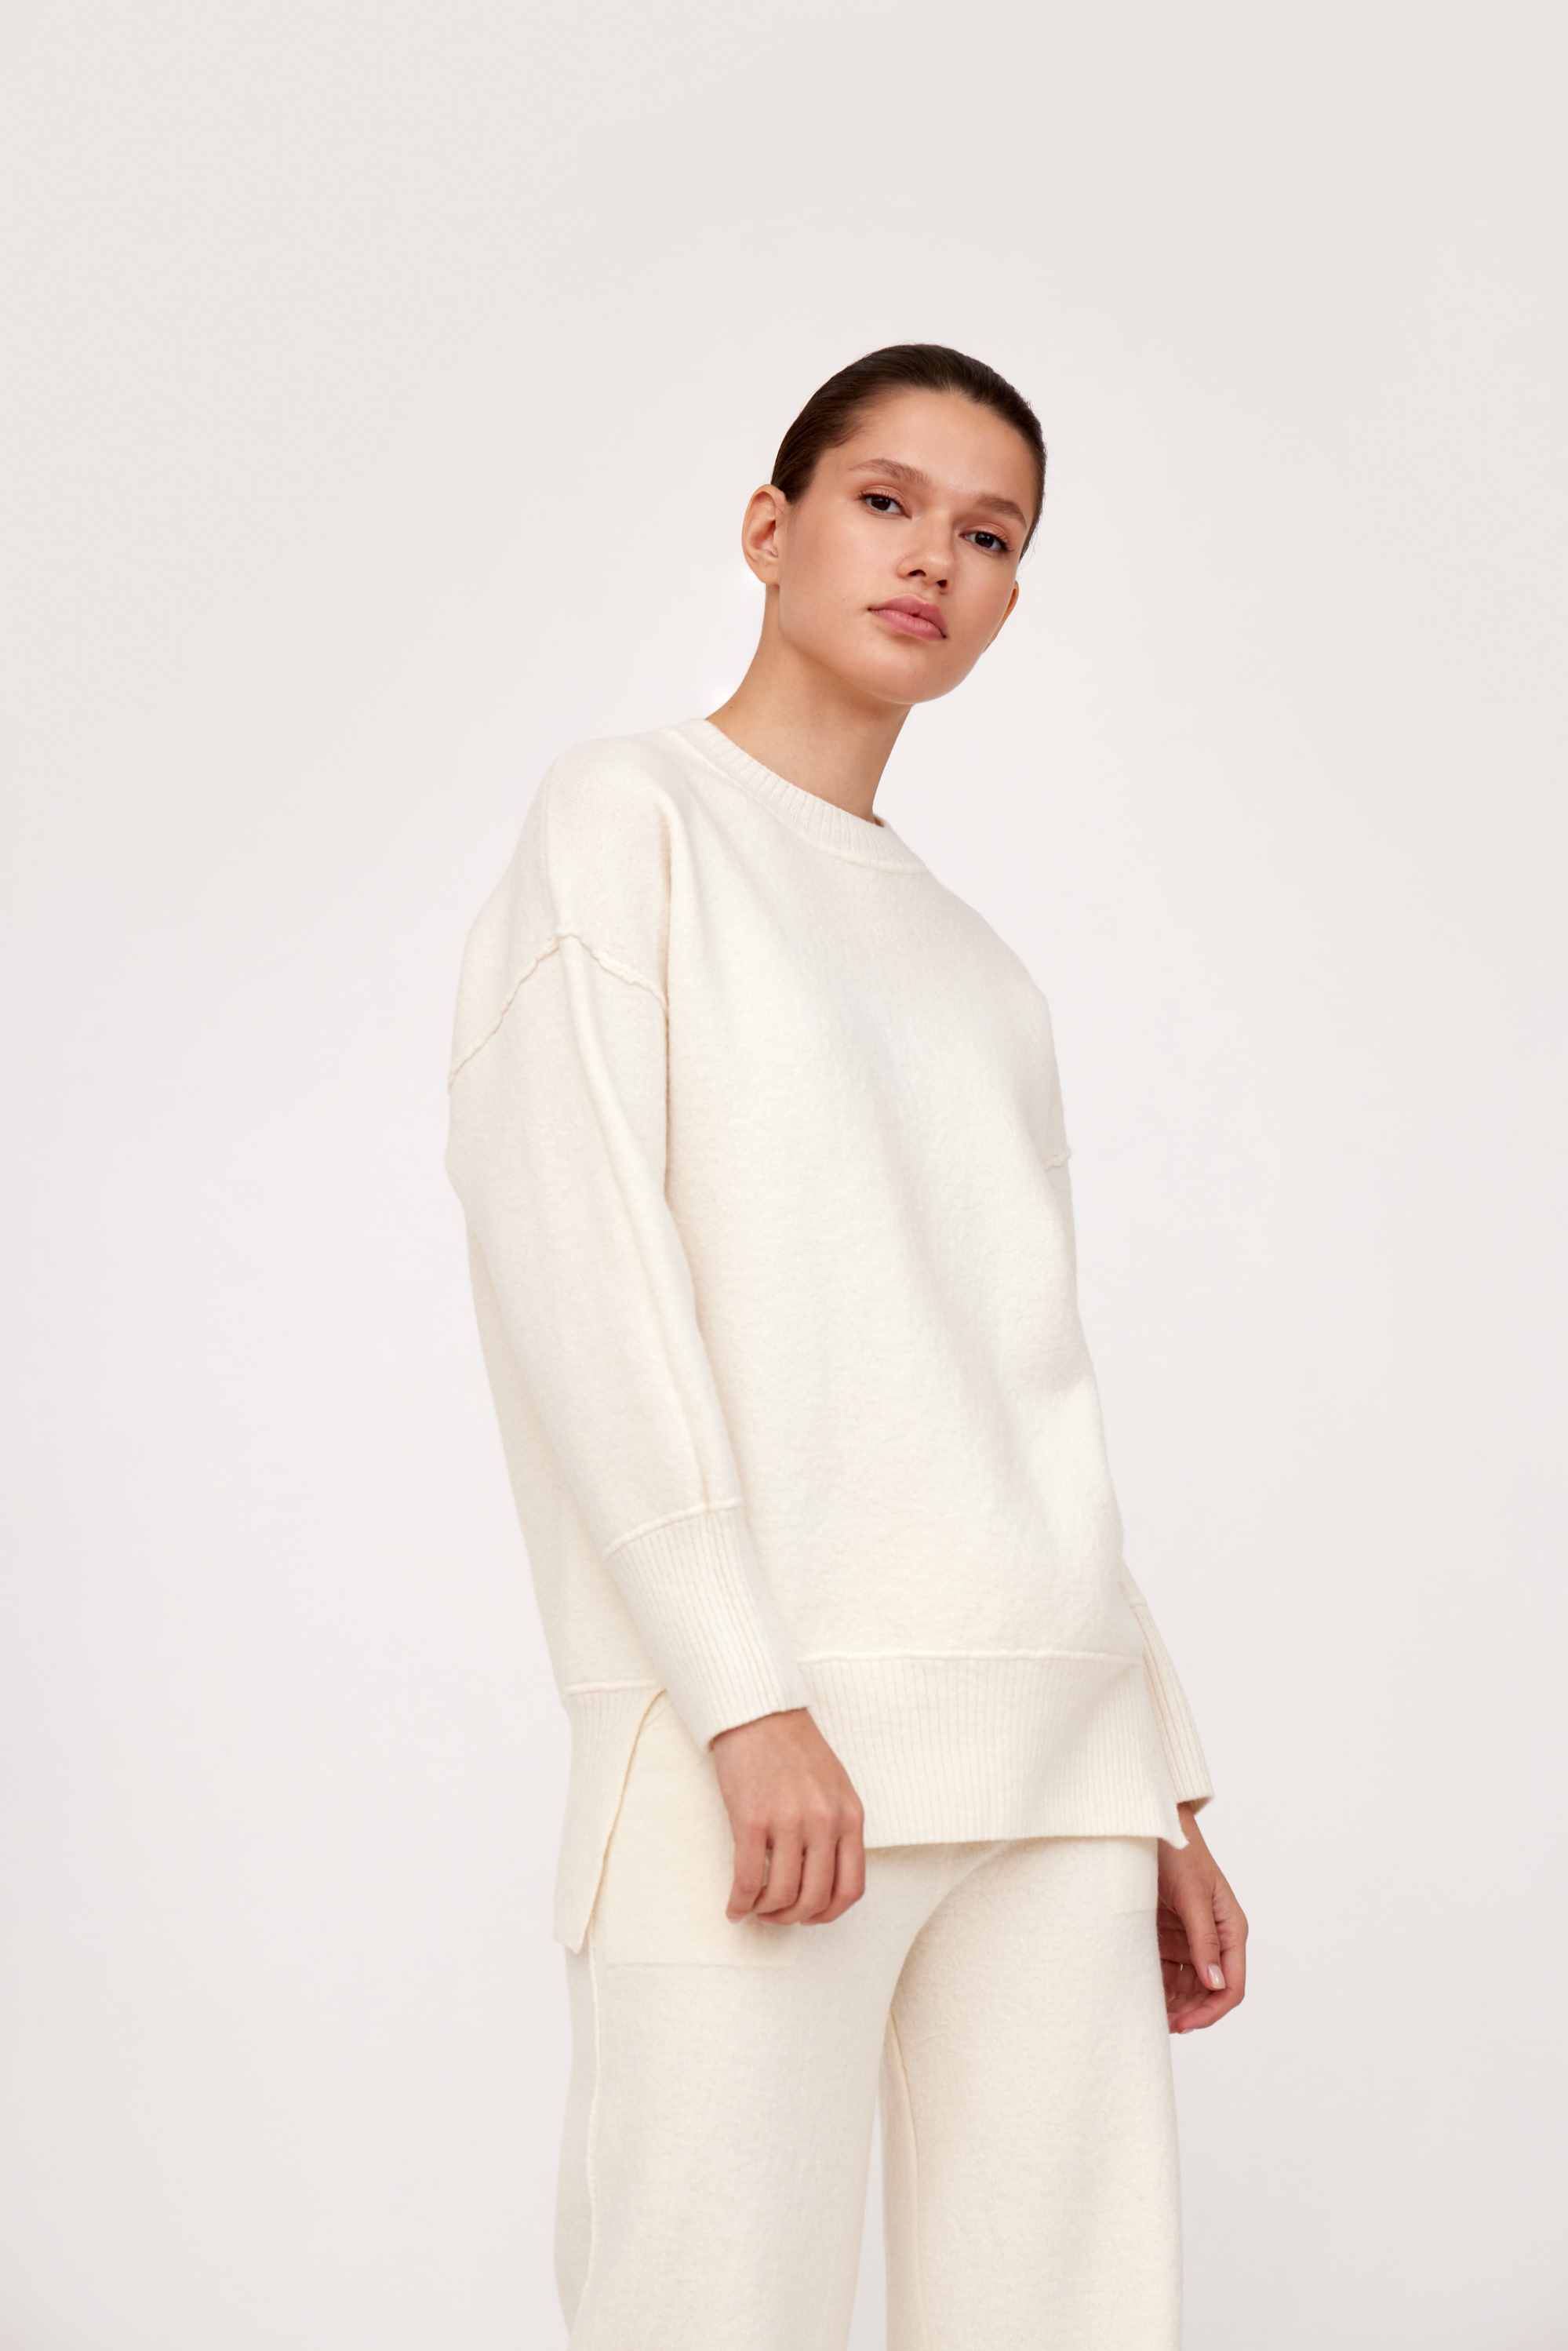 Pull-over 3832-09 Ivory from BRUSNiKA